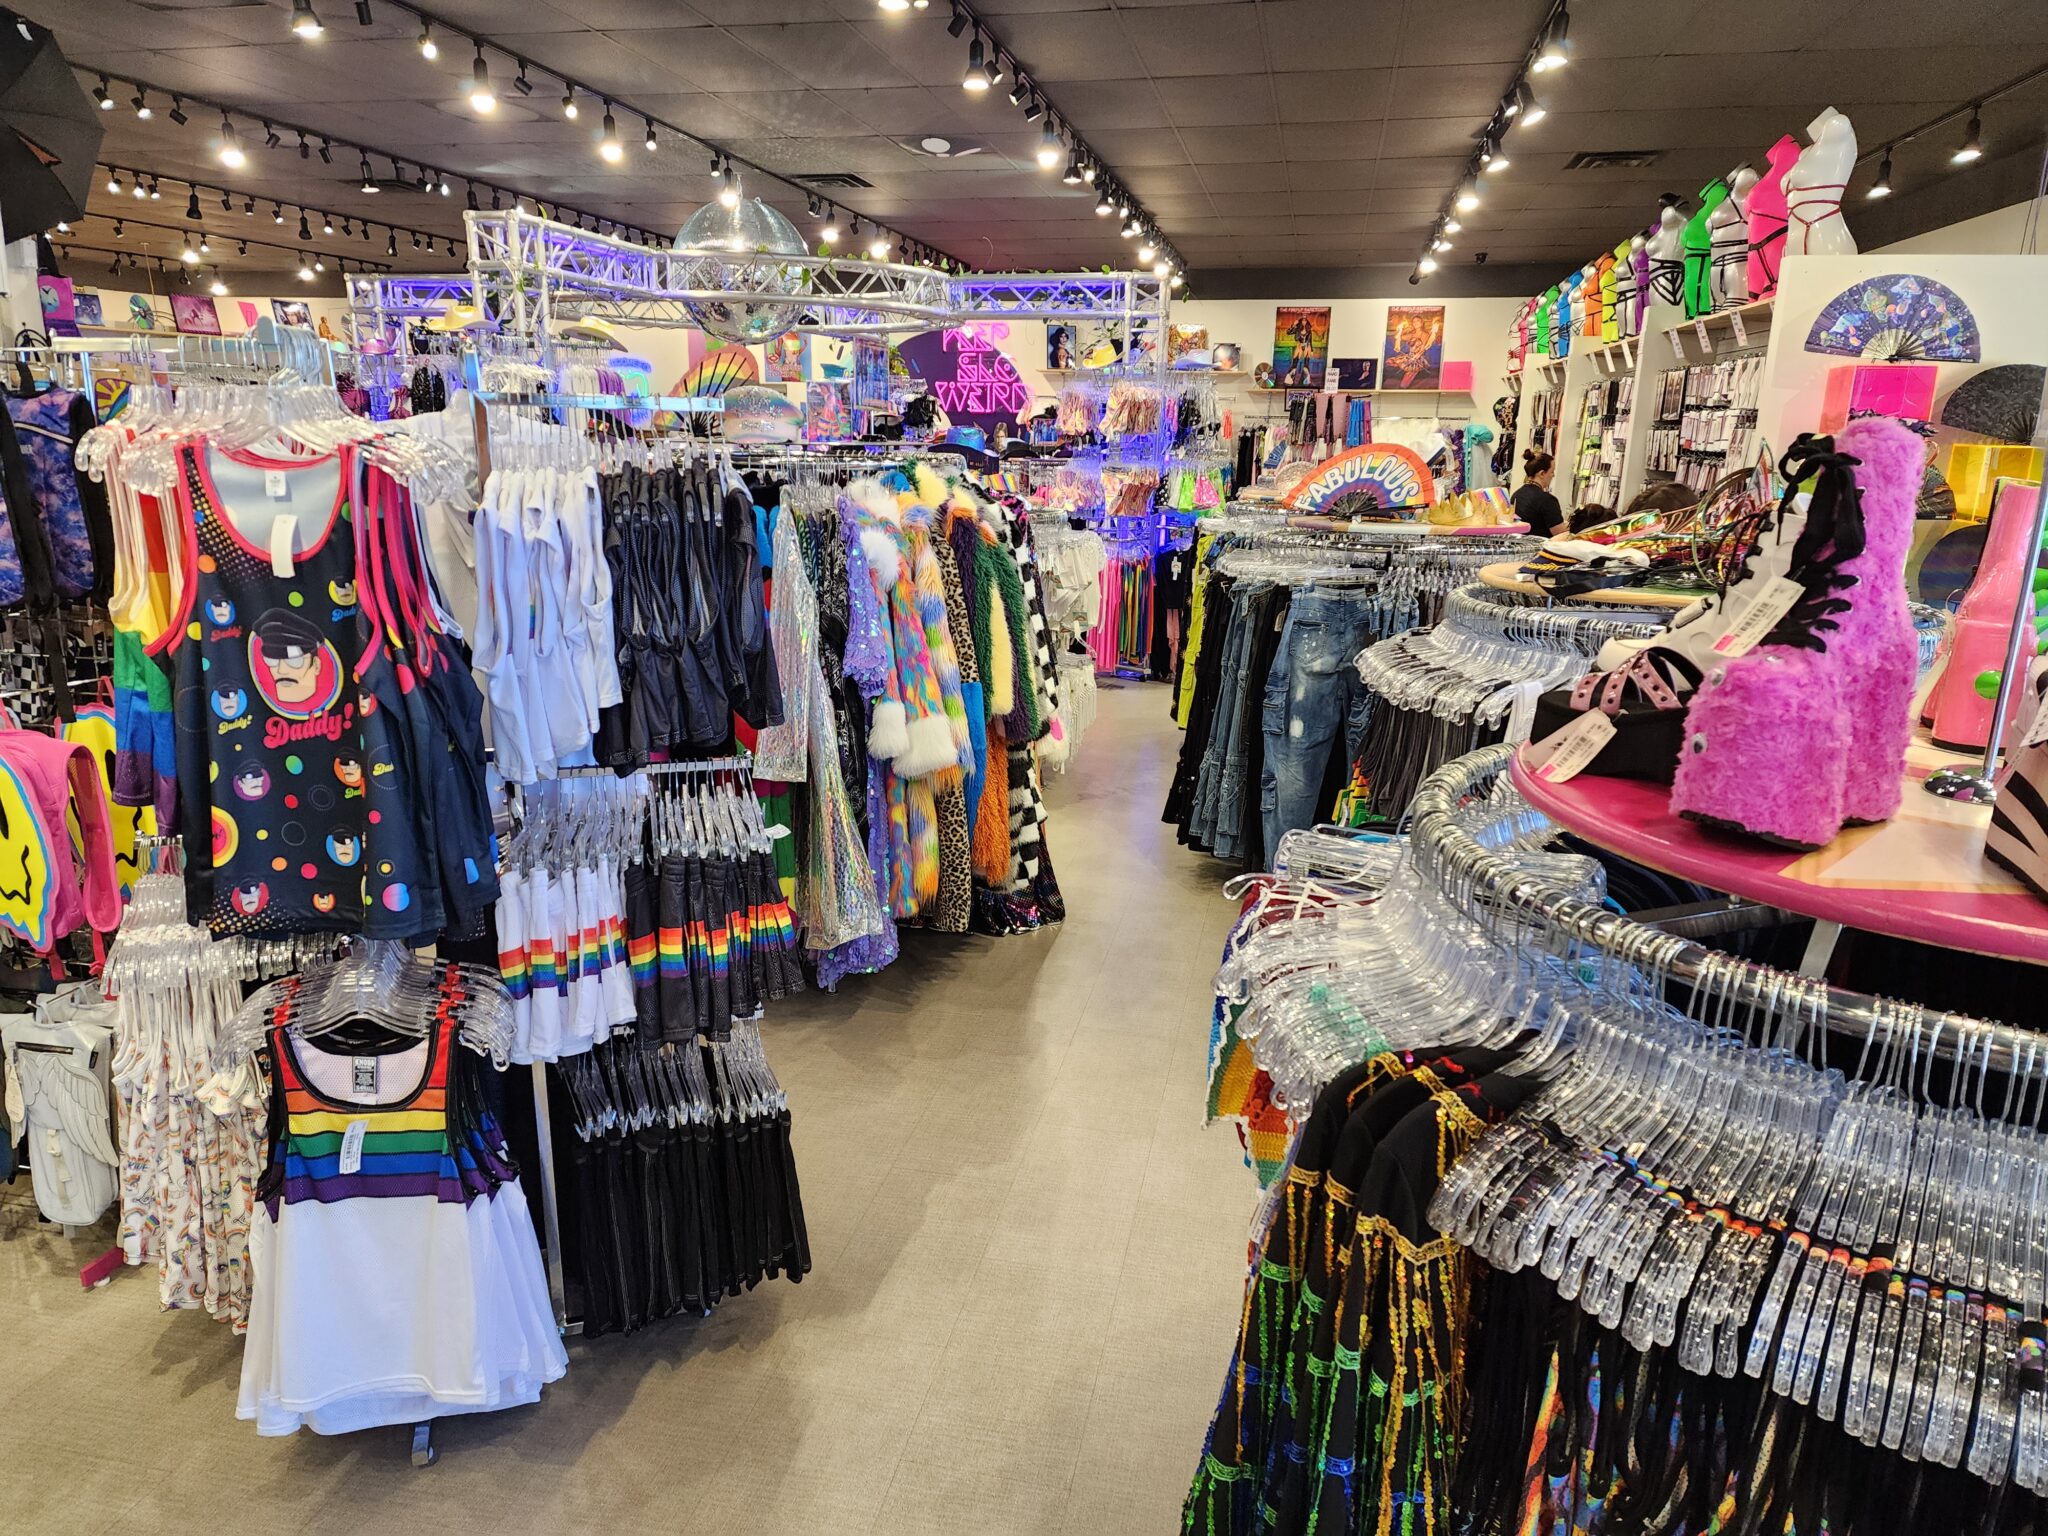 A vibrant display inside iconoCLAD, showcasing a colorful array of new items for the 2024 Utah Pride festival. The shop is adorned with rainbow pashminas, sparkling bio-glitter sunscreen, face and body gems, and a variety of flags, patches, and pins. The eclectic mix of chic outfits and accessories highlights the store’s unique and inclusive fashion vibe, ready to celebrate Pride in style.